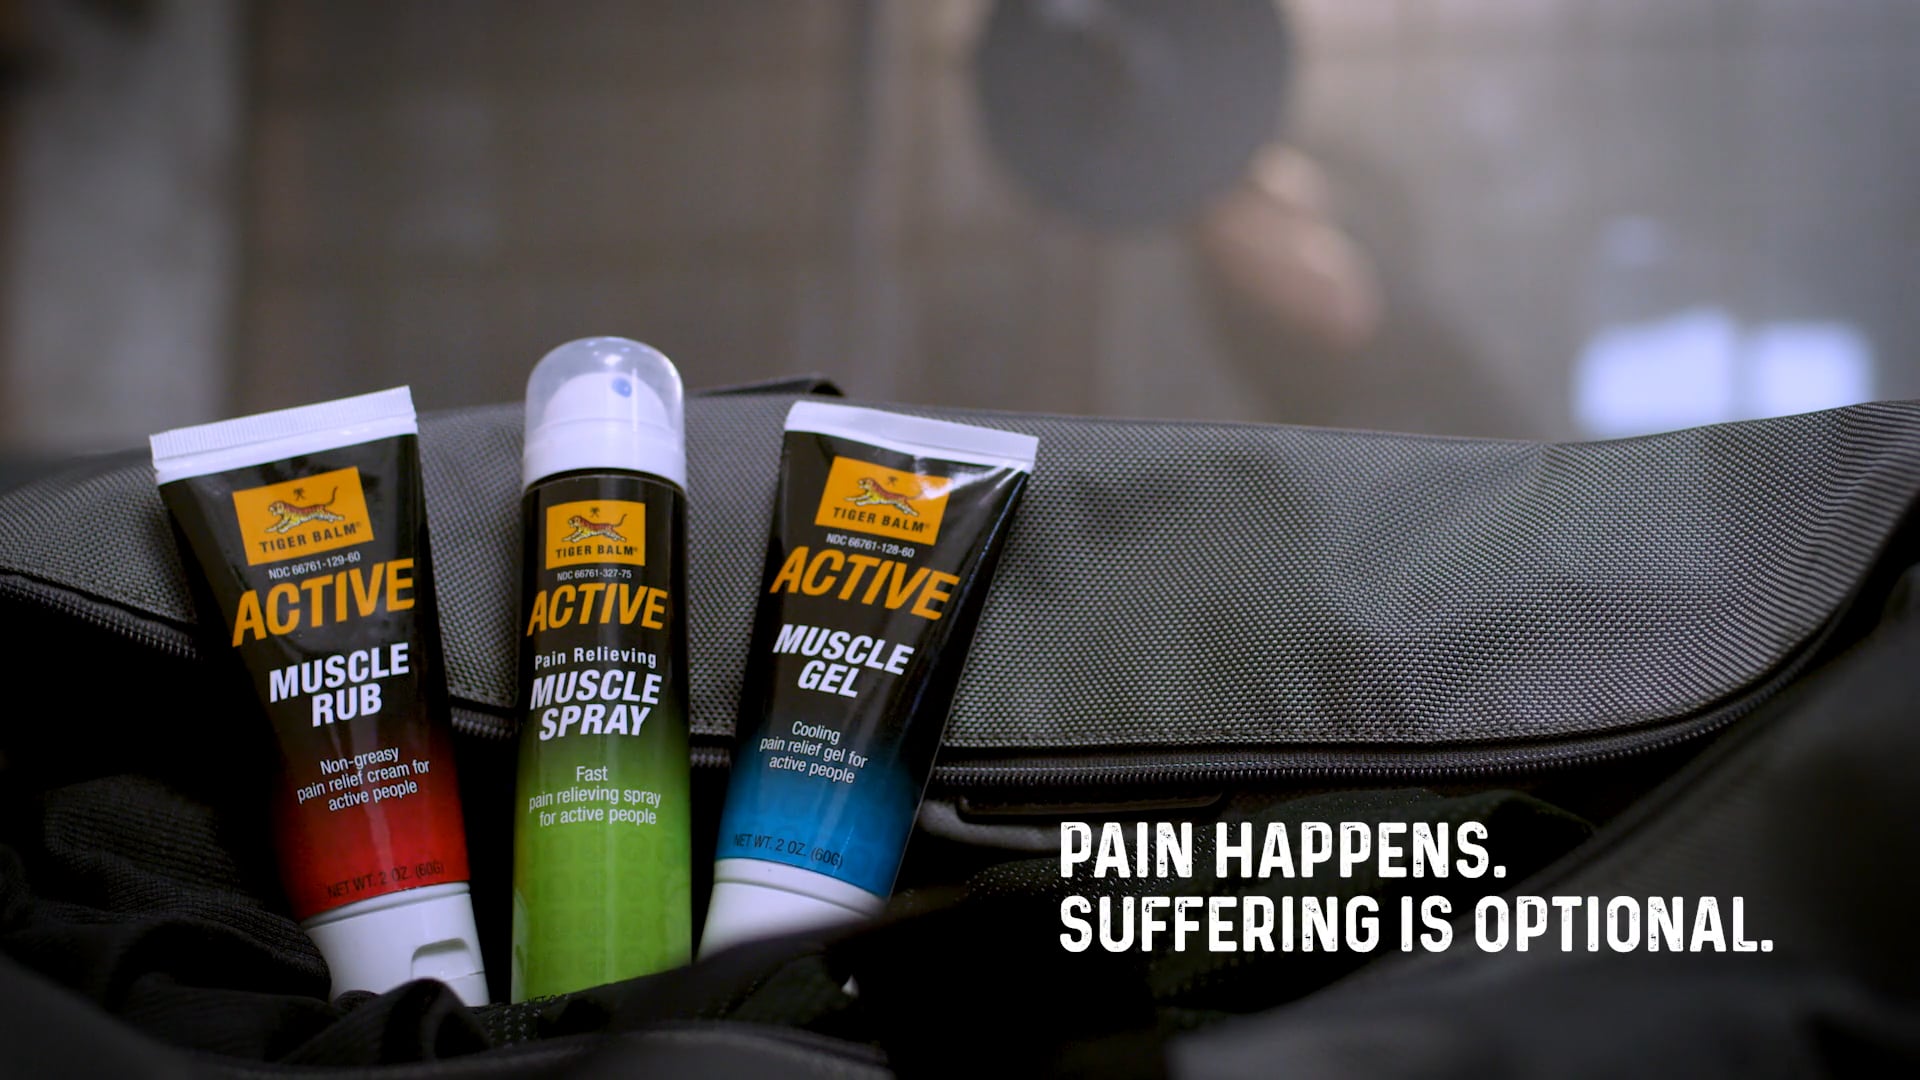 TIGER BALM ACTIVE - CHRISTIAN TAYLOR - (COMMERCIAL)